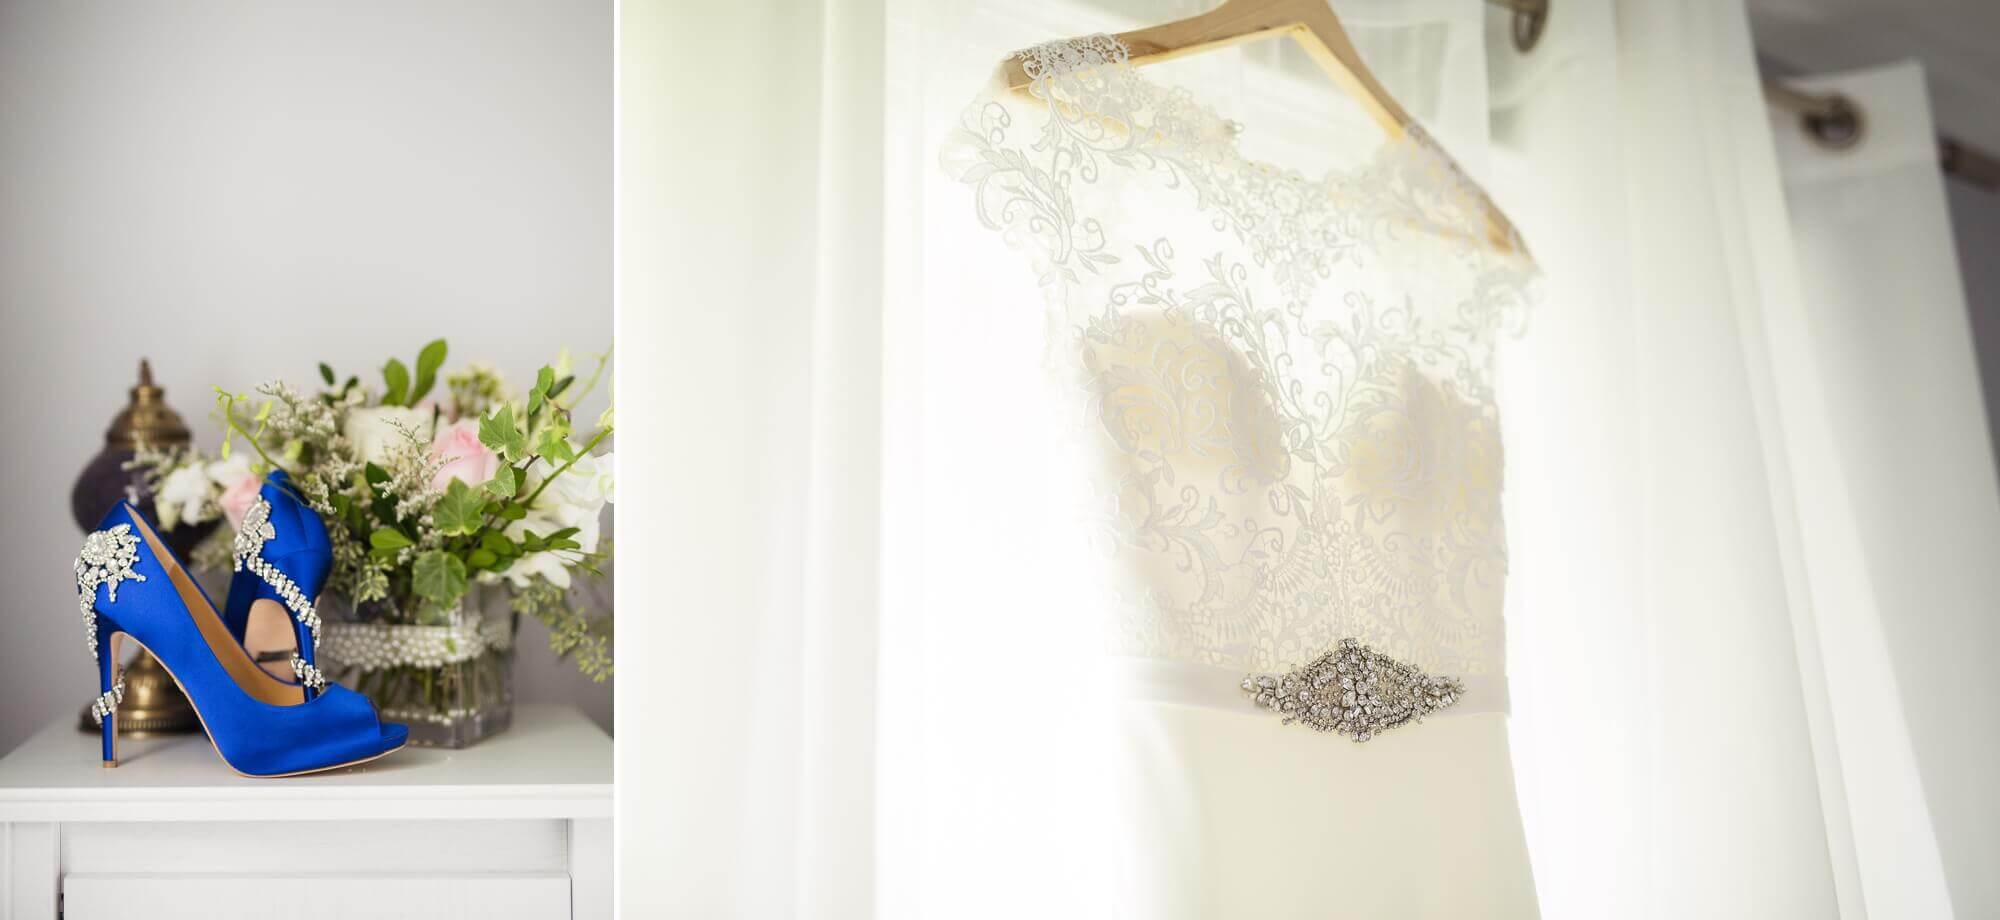 Details of the brides blue wedding shoes and wedding dress elegantly hung in the window